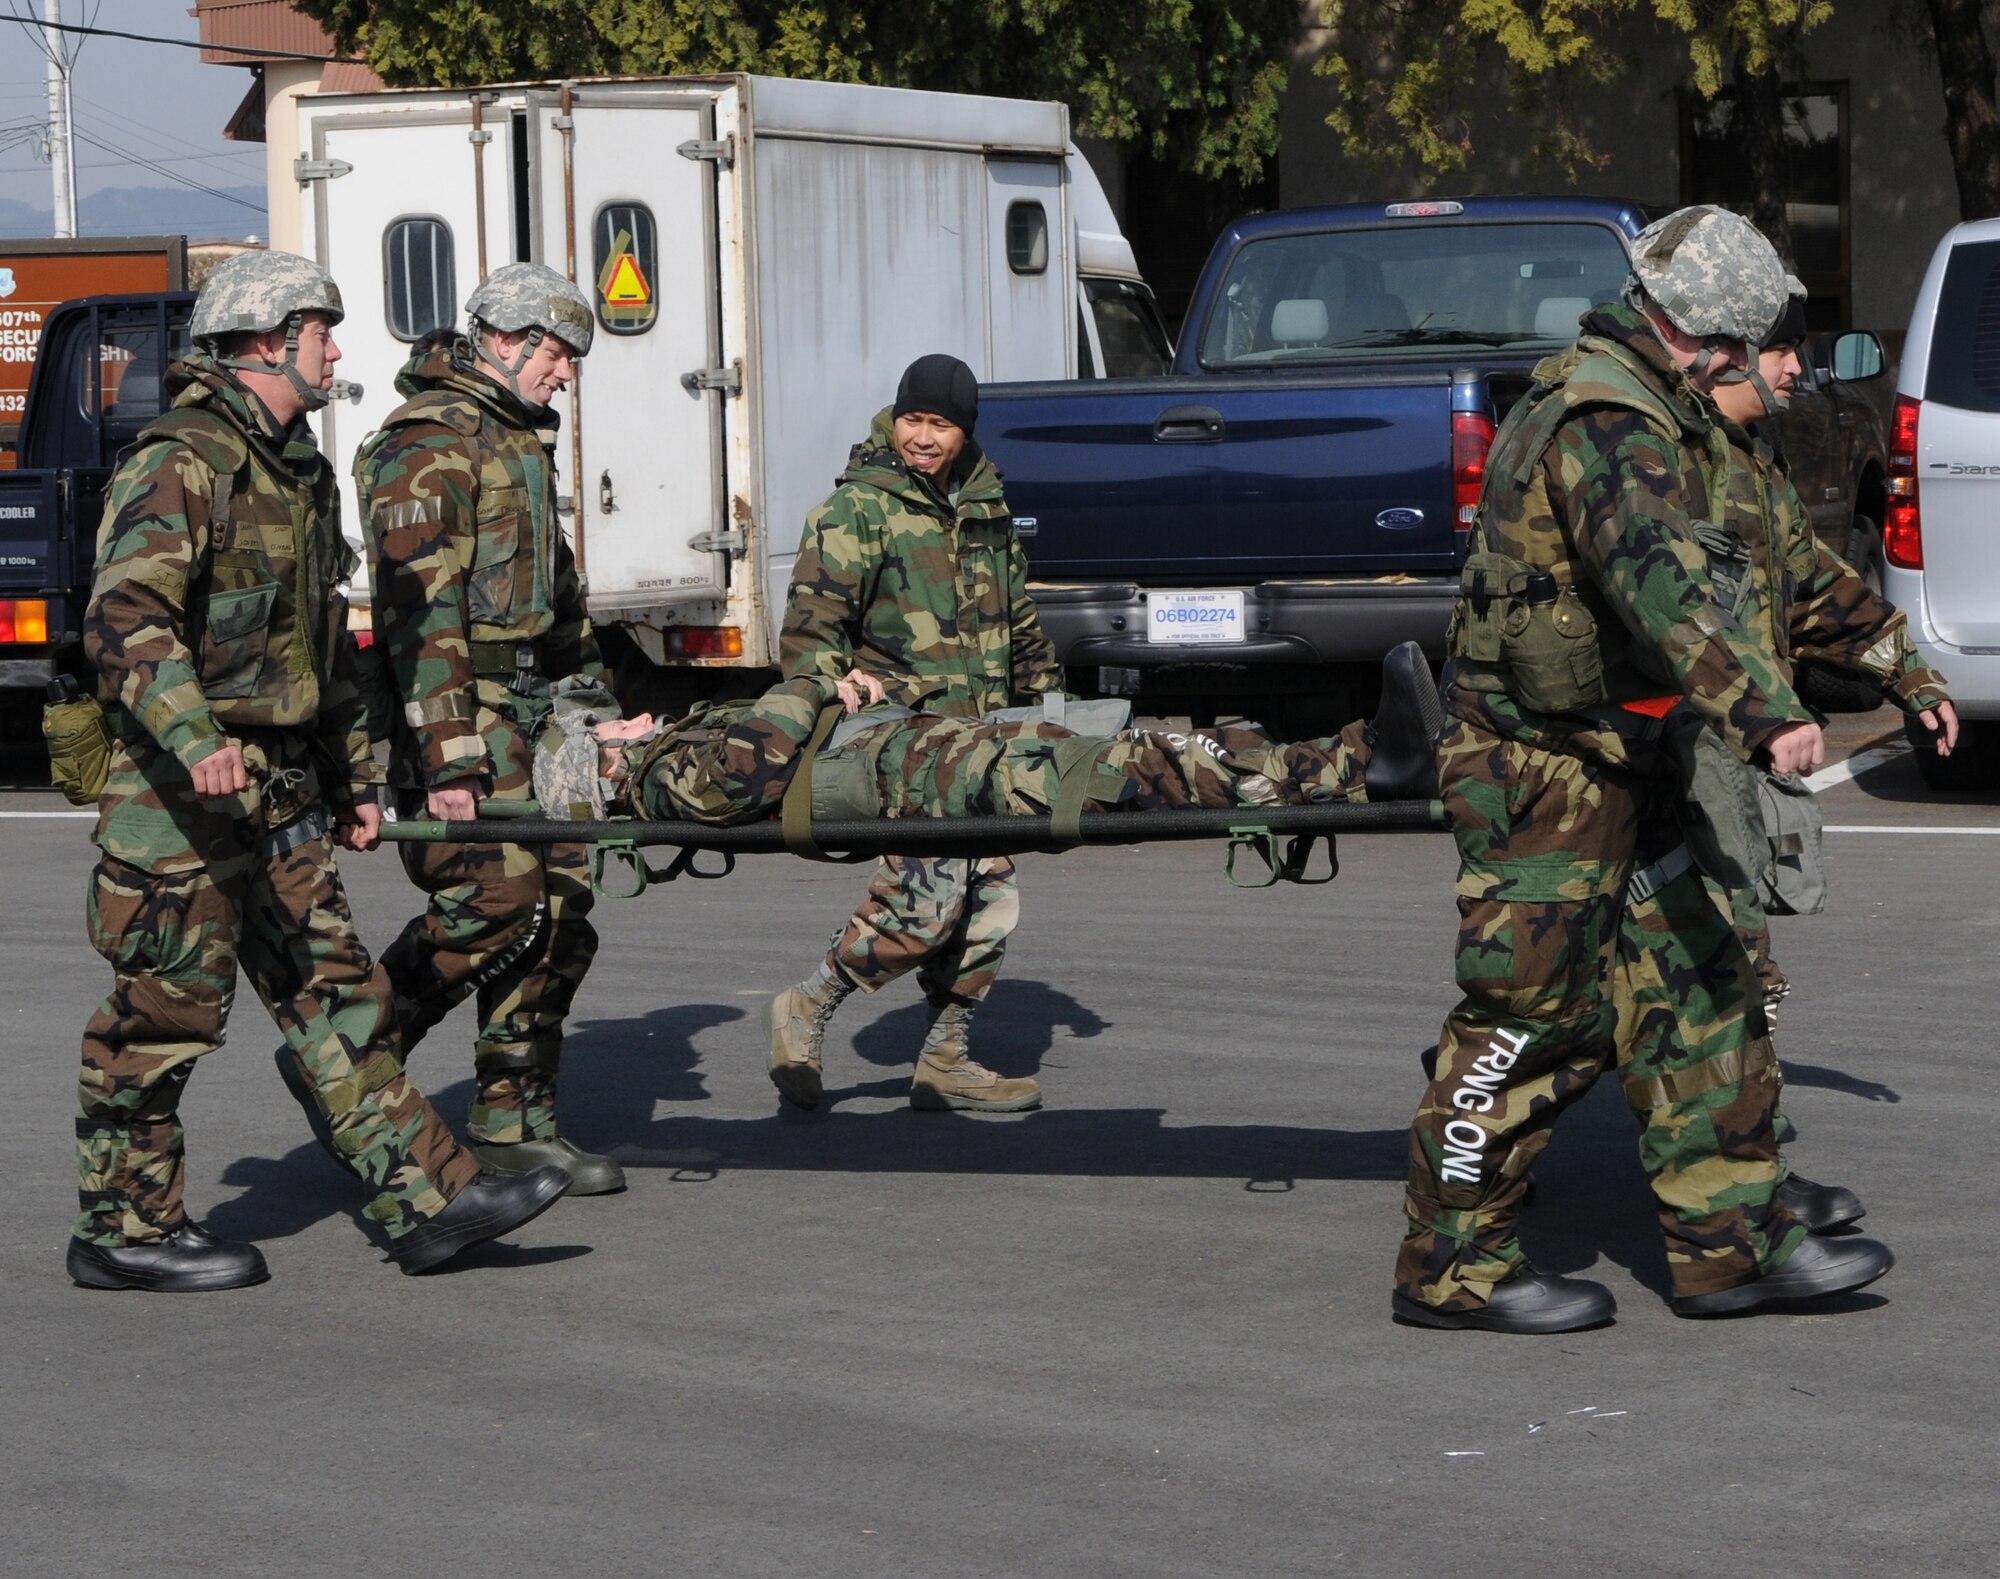 DAEGU AIR BASE, Republic of Korea -- Tech. Sgt. Jose Llanes (on stretcher), from the 353rd Operations Support Squadron Medical Flight, instructs members of the 353rd Special Operations Group on how to properly carry a patient on a stretcher during training here March 19. The training is in preparation for the group's annual operational readiness exercise which affords unit members an opportunity to practice wartime skills necessary for their ability to survive and operate. (U.S. Air Force photo by Tech. Sgt. Aaron Cram)